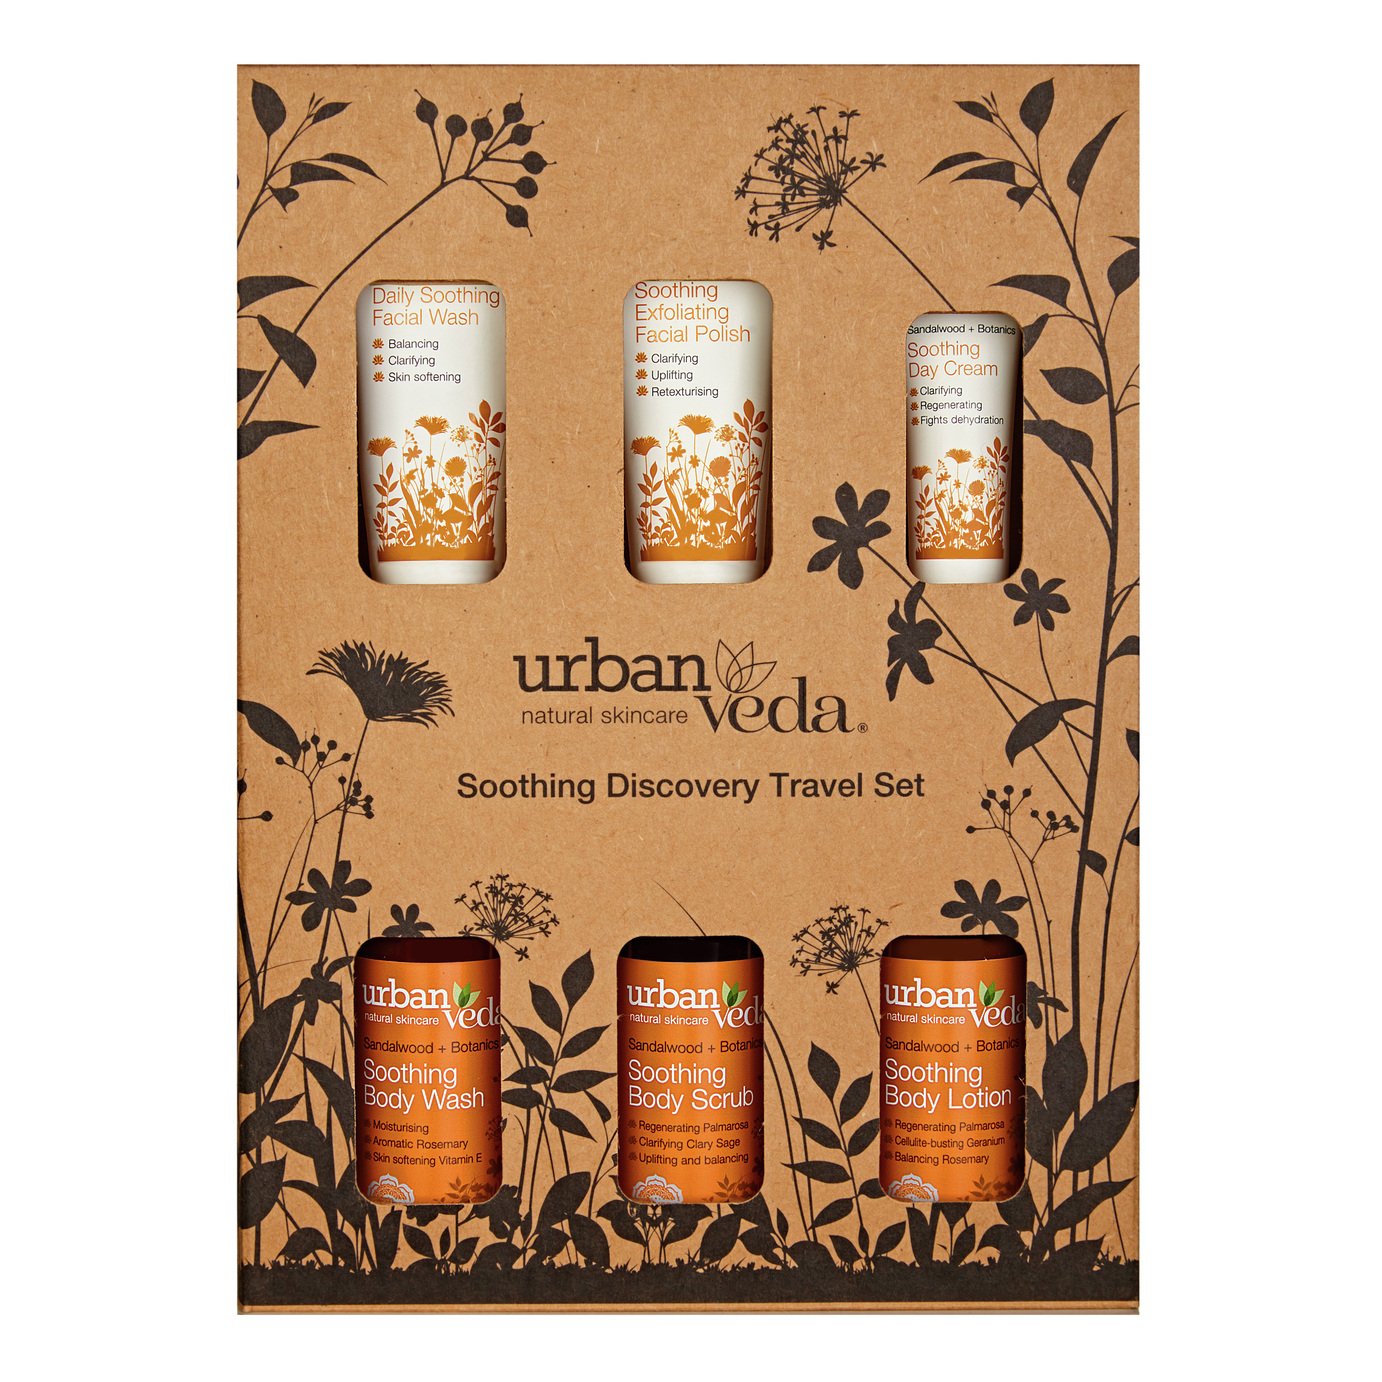 Urban Veda Soothing Discovery Travel Set